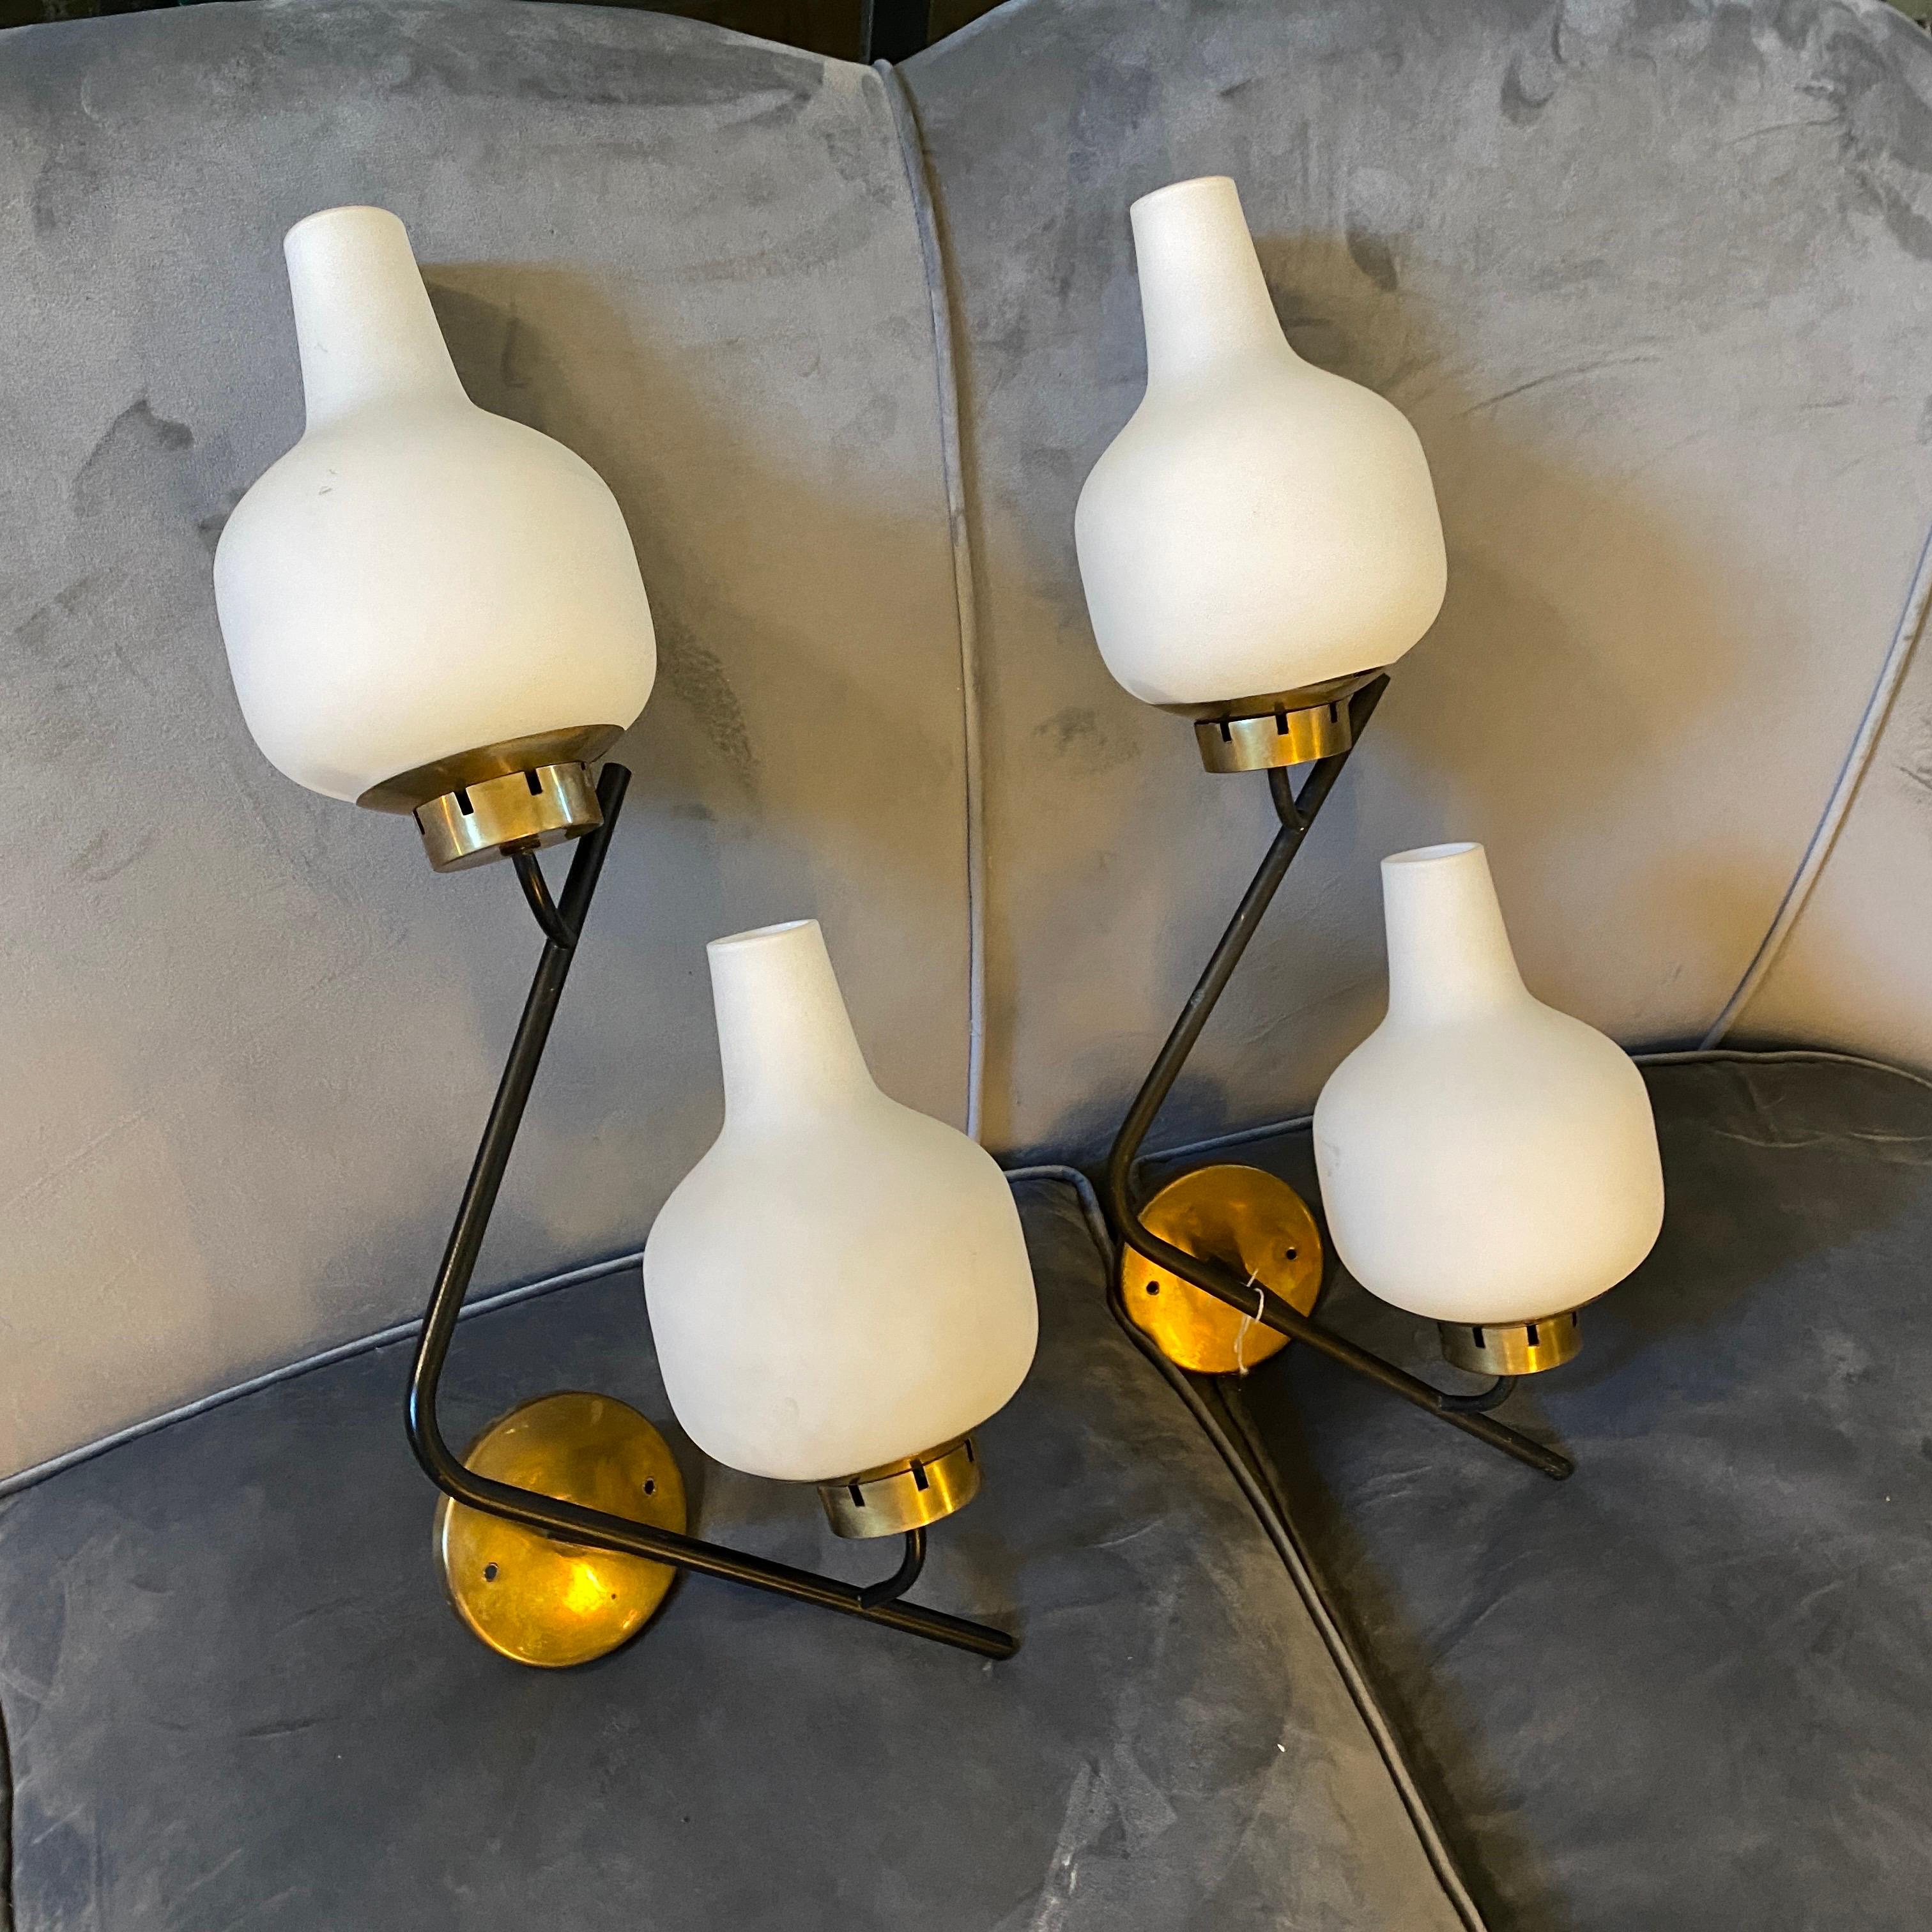 A pair of high quality zig zag wall sconces designed and manufactured in Italy in the 1950s by Stilnovo, brass it's in original patina, original white glass diffusors are in good conditions, they work both 110-240 volts and need regular e14 bulbs.